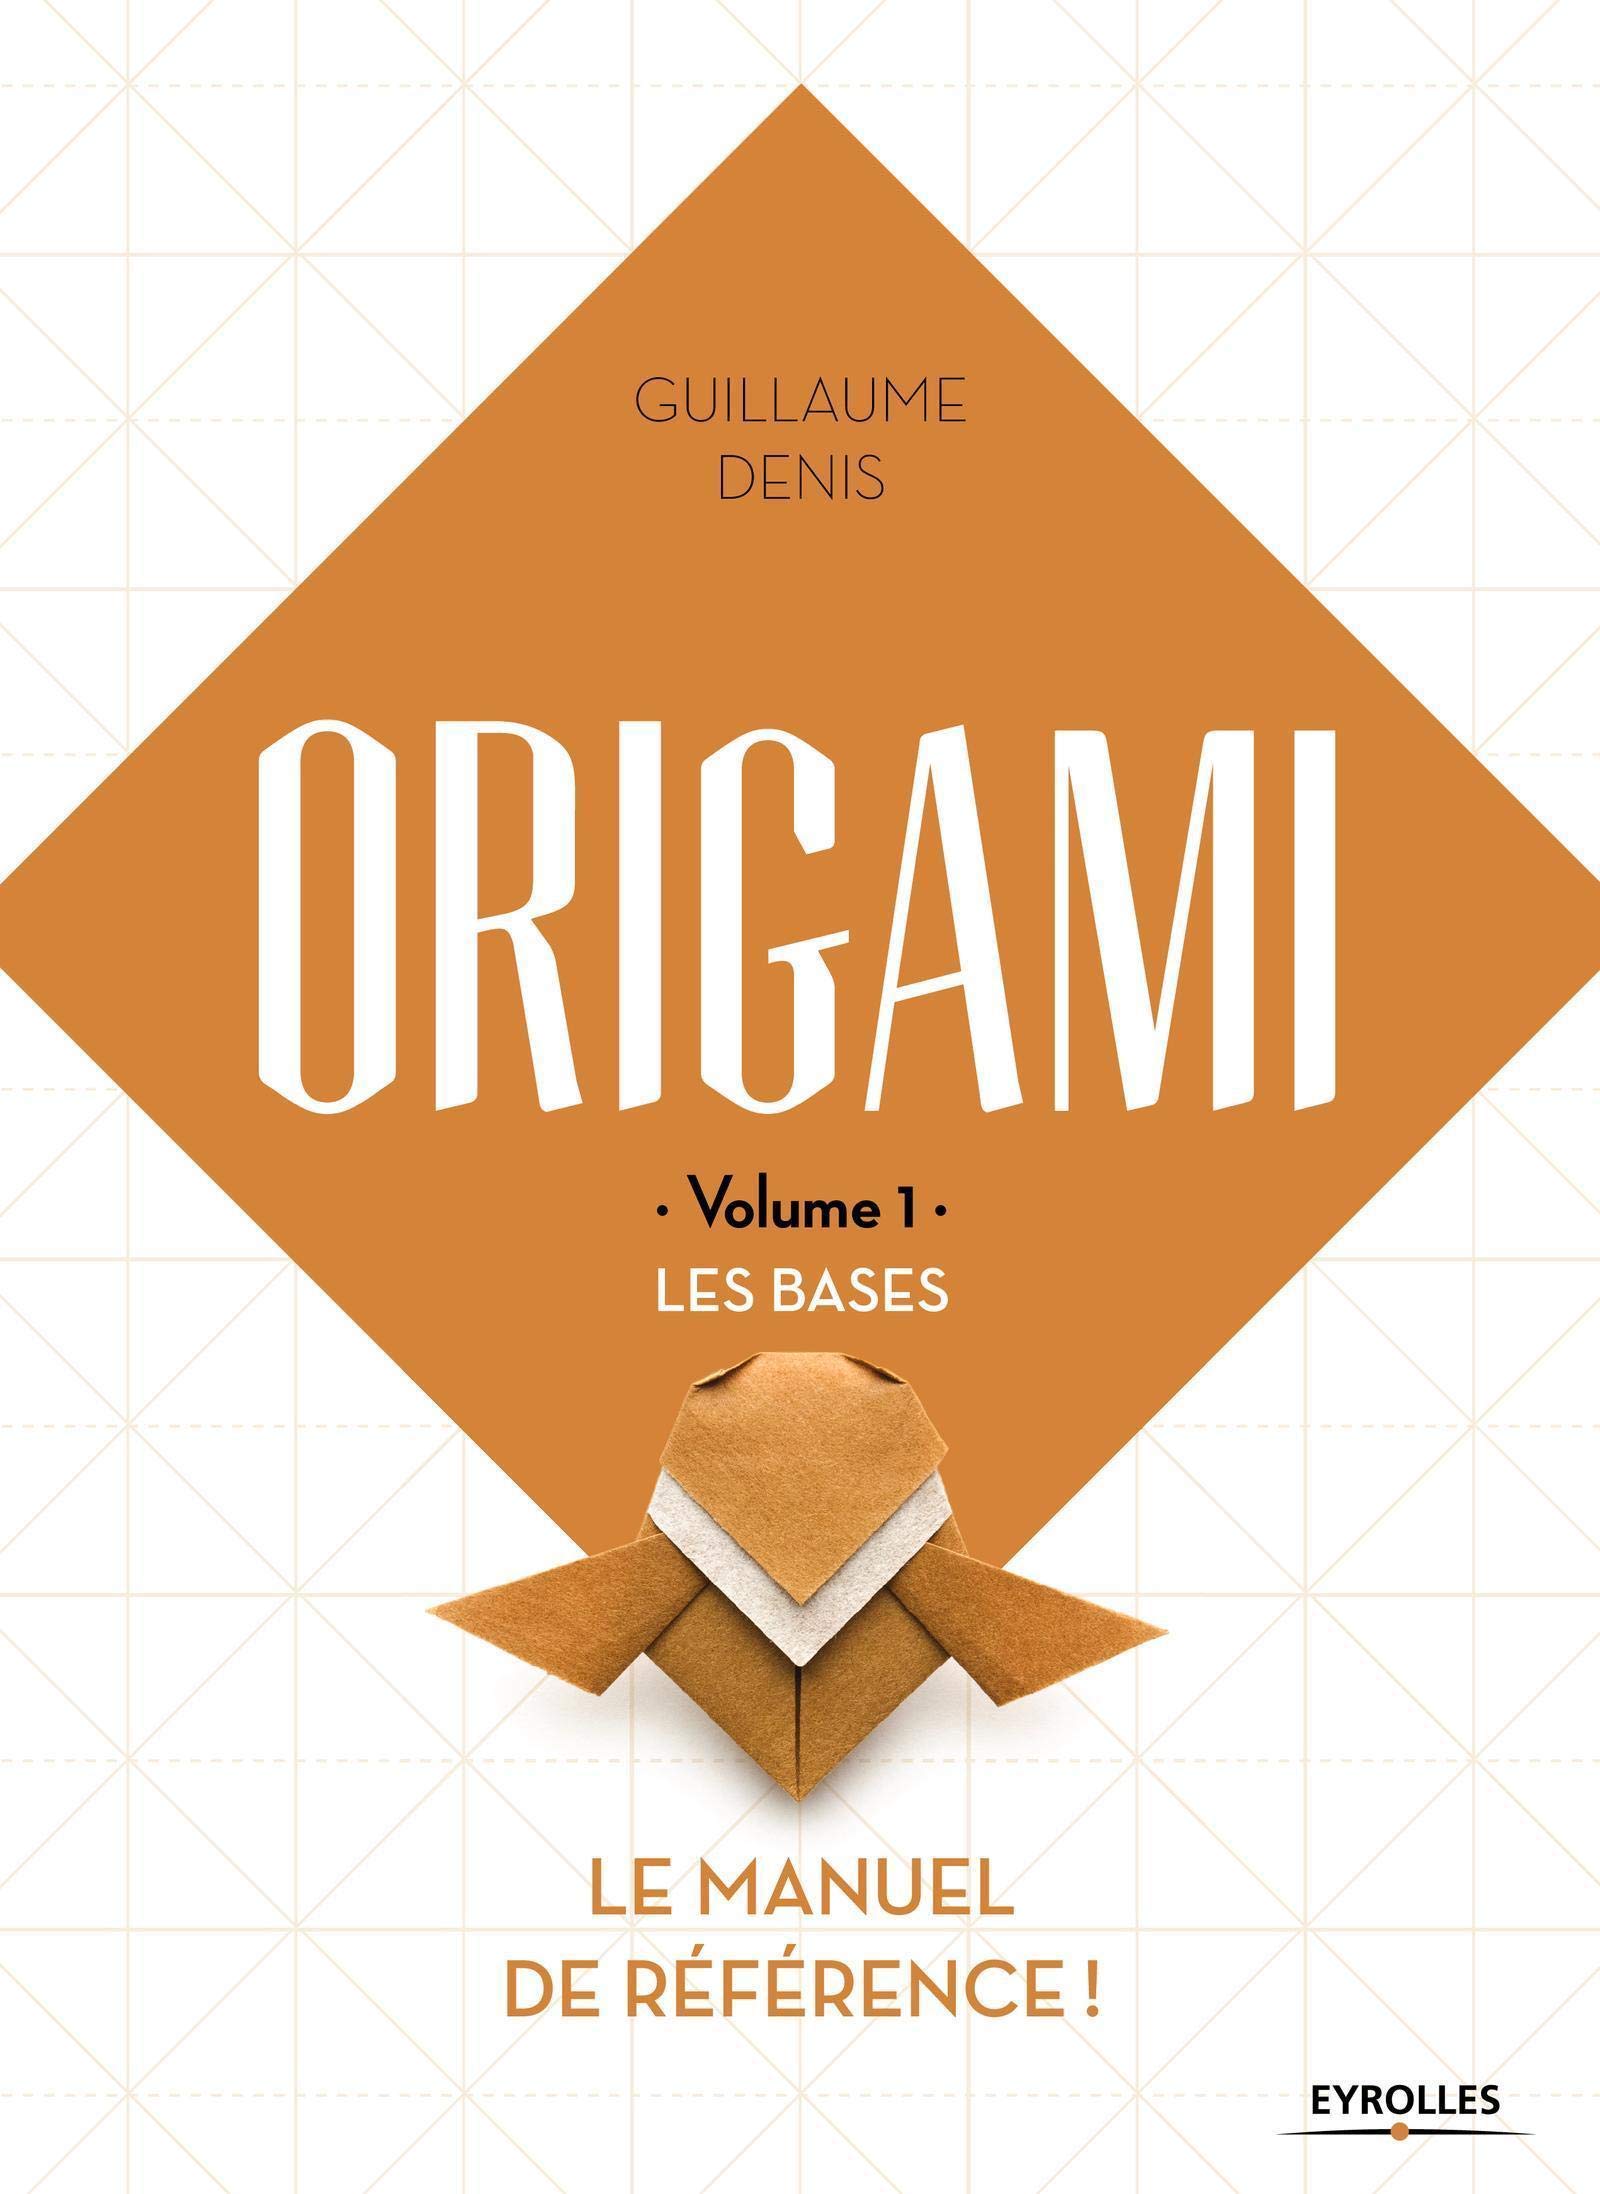 ORIGAMI - Volume 1 - LES BASES : page 163.